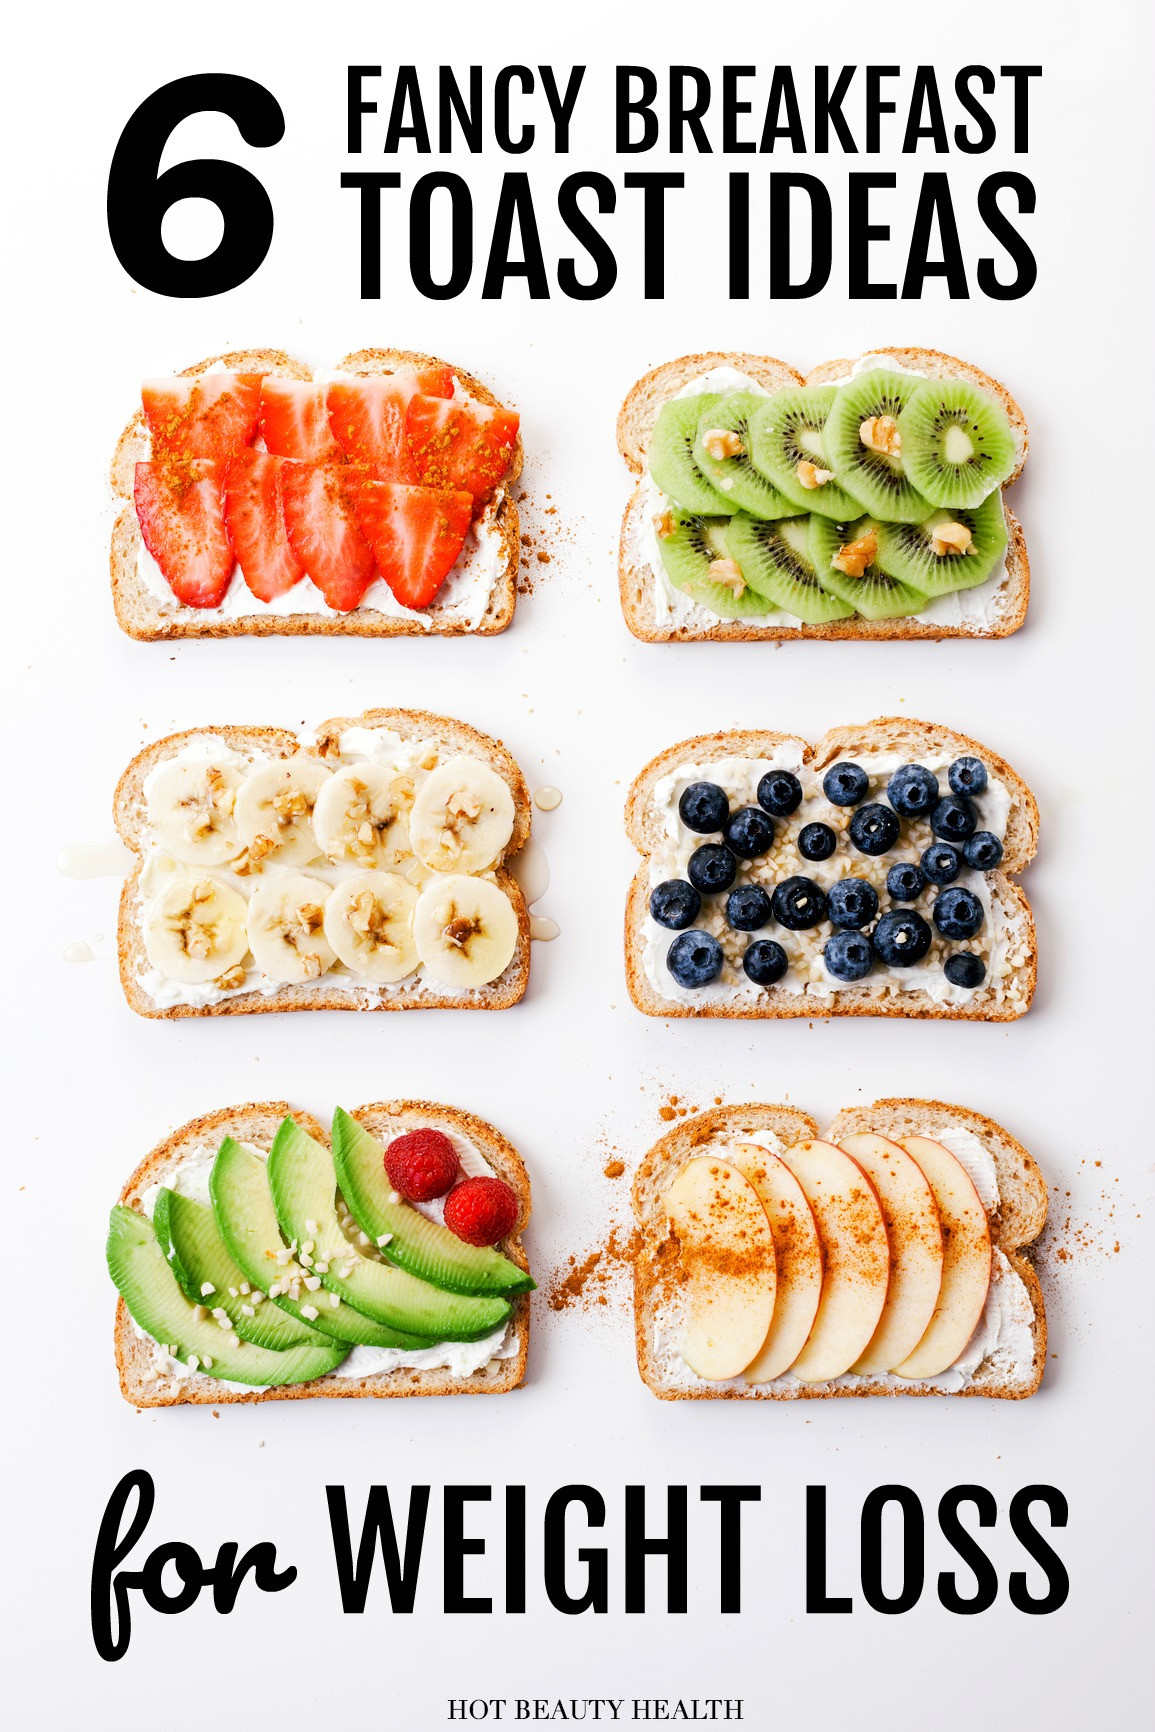 Healthy Breakfast Foods For Weight Loss
 6 Easy & Creative Ways to Fancy Up Breakfast Toasts Hot